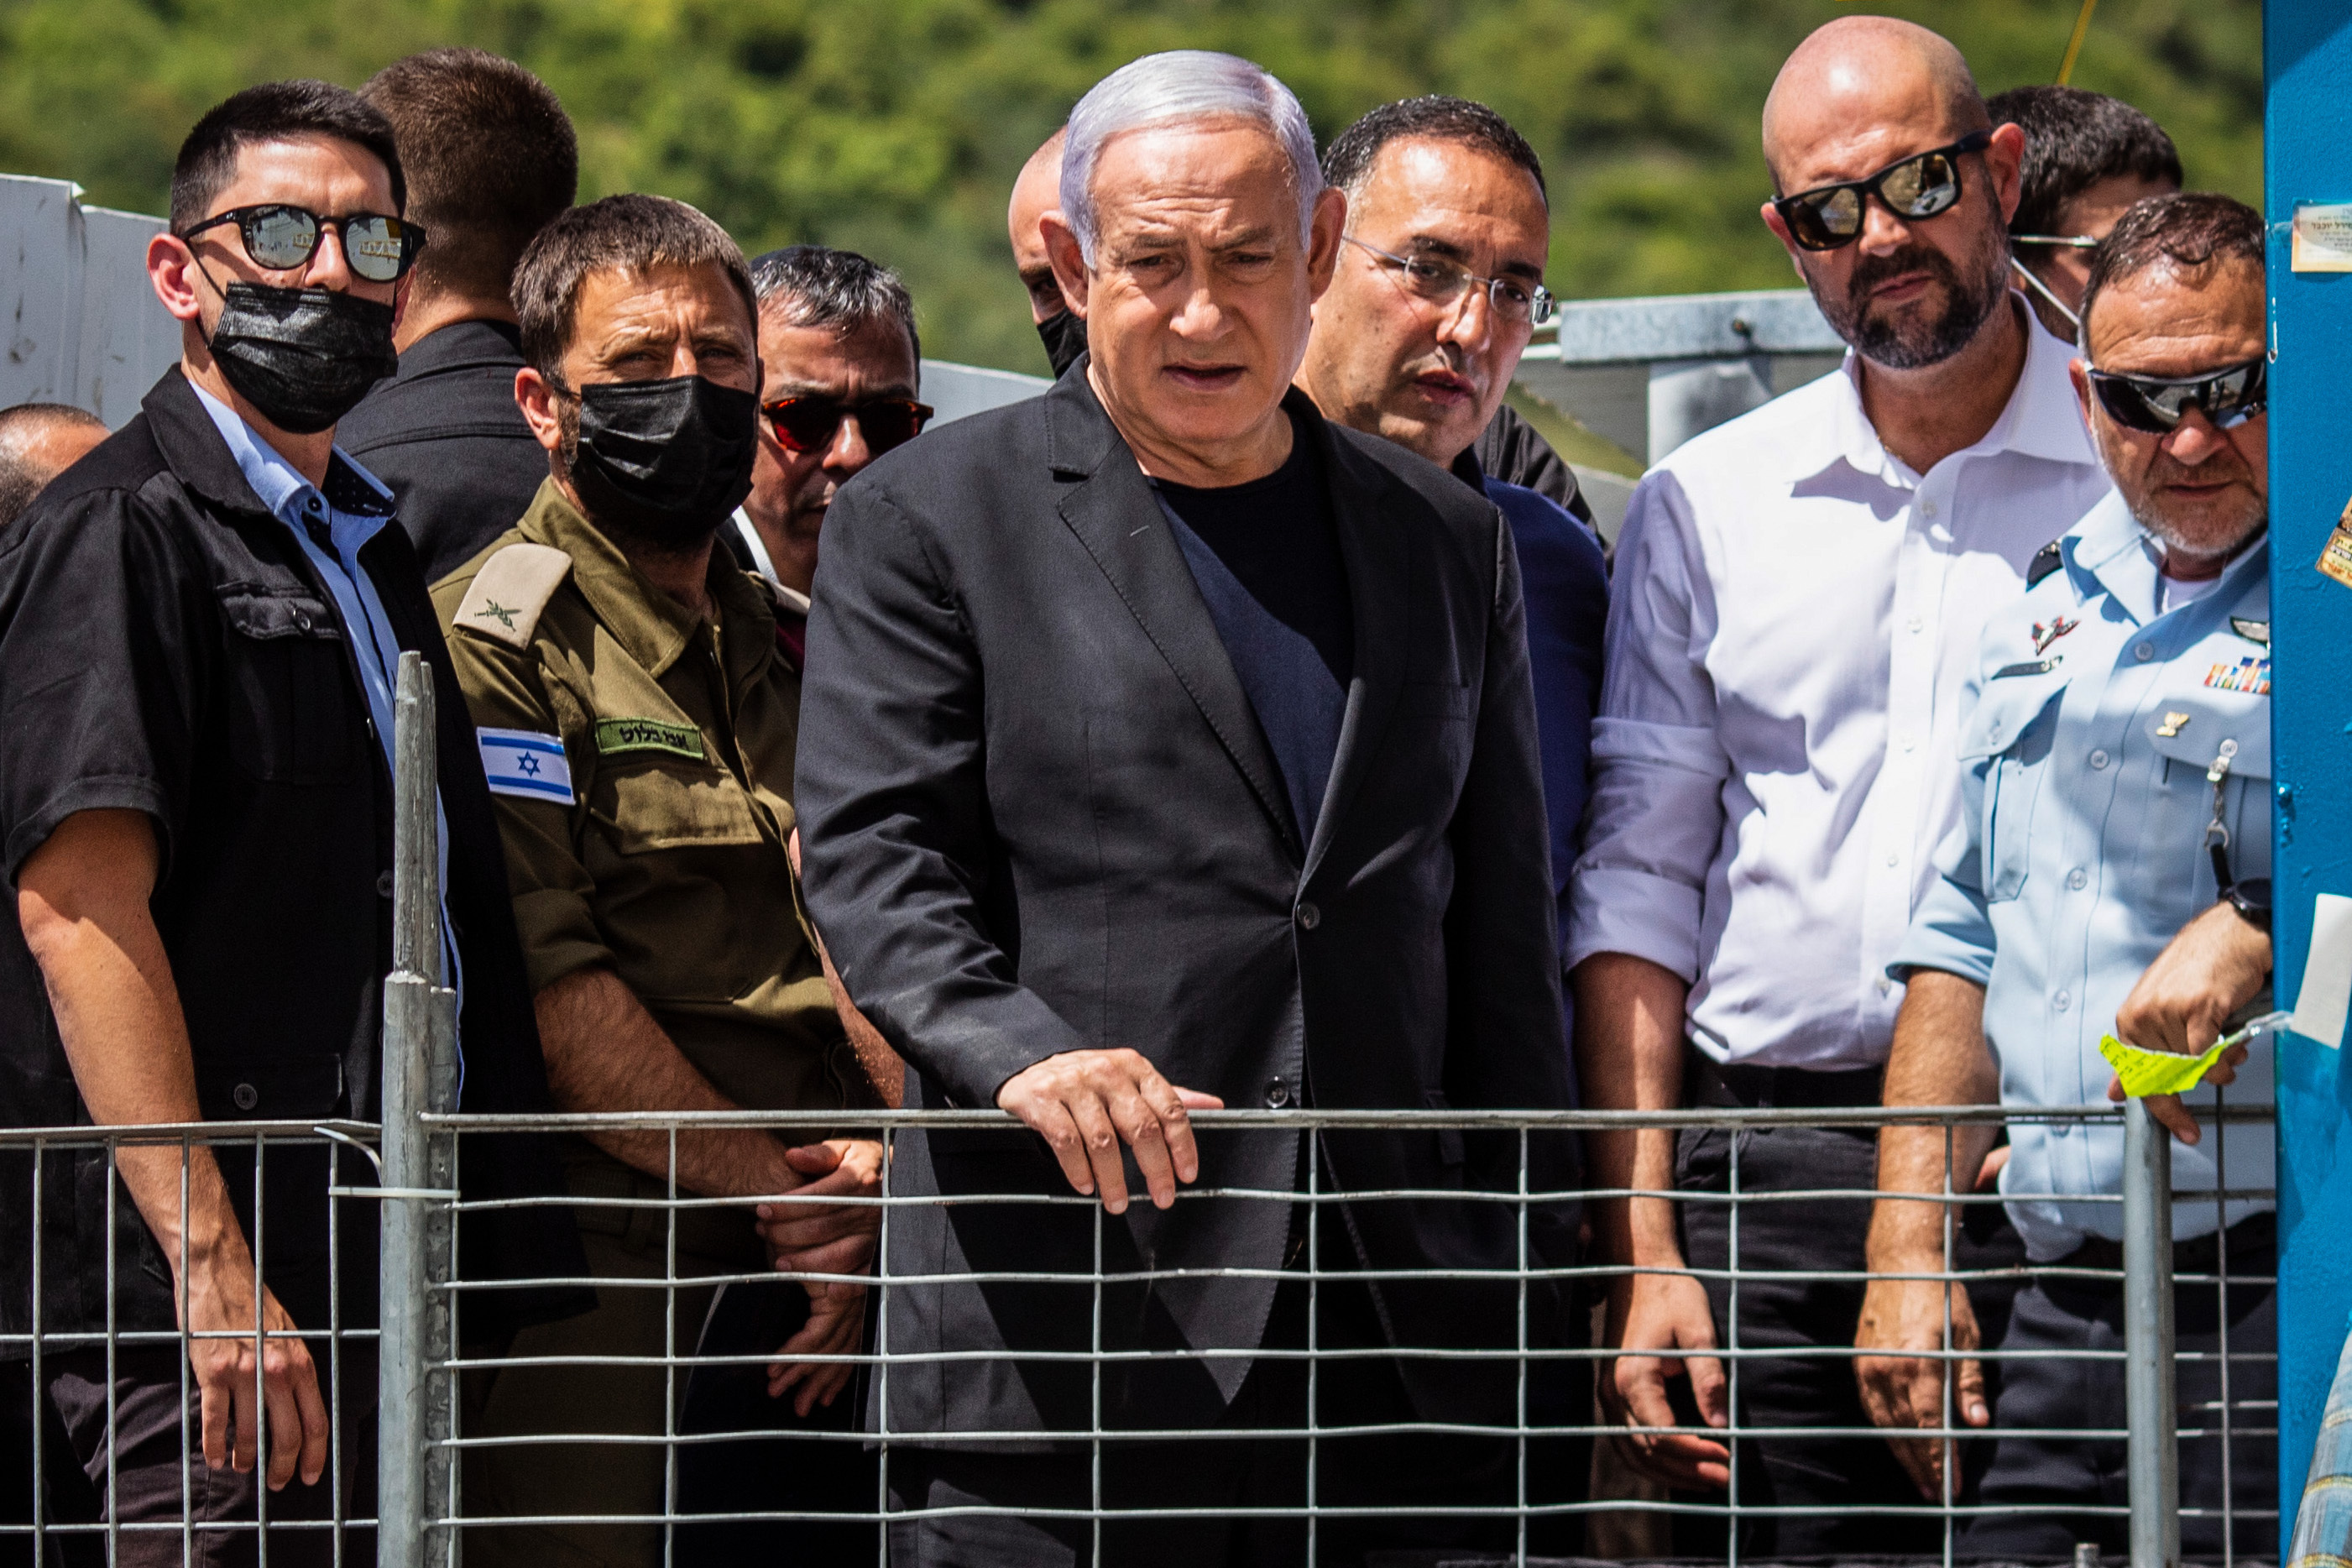 Israeli Prime Minister Benjamin Netanyahu visits the Jewish Orthodox pilgrimage site of Mount Meron, where dozens of worshippers were killed in a stampede during the Jewish religious festival of Lag Ba'Omer in northern Israel.